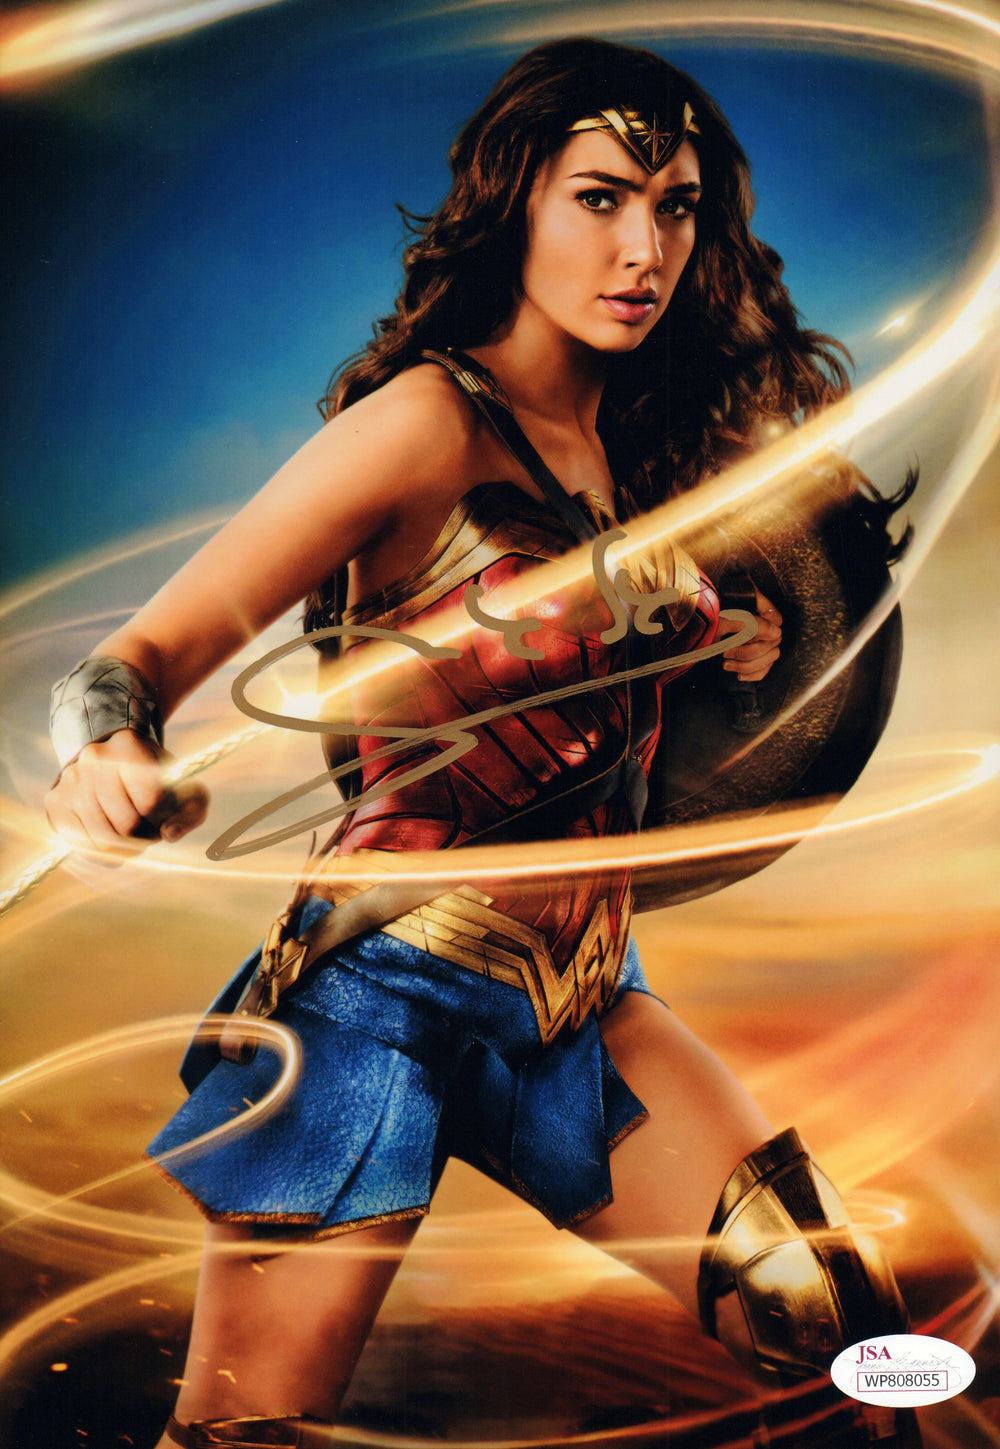 Gal Gadot as Wonder Woman (Witnessed) Signed 8x10 Photo